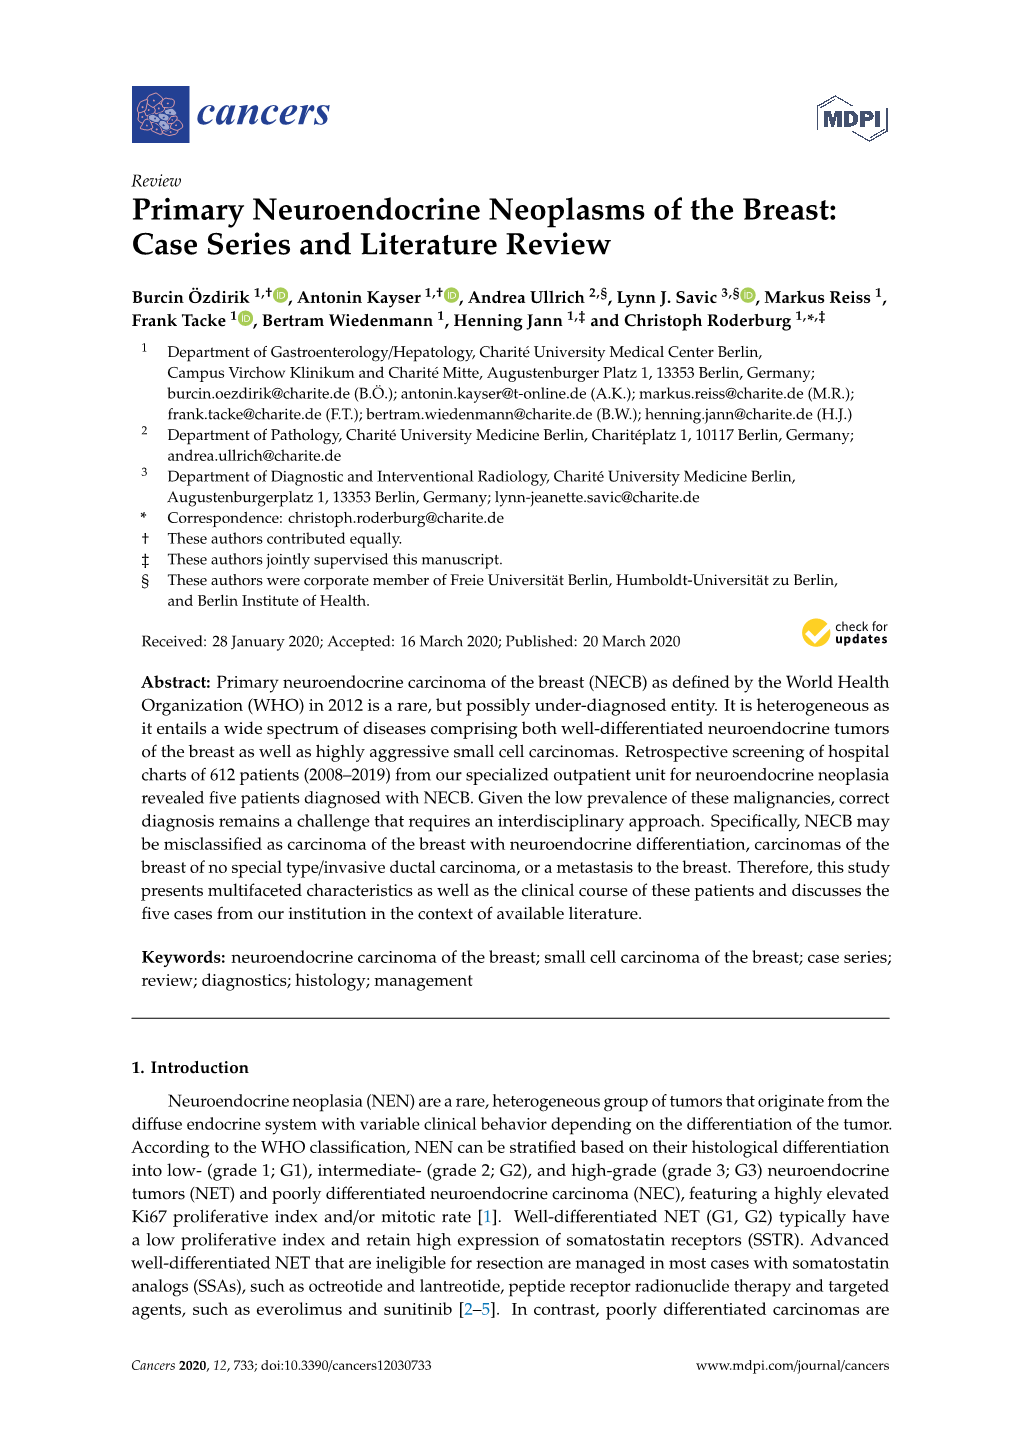 Primary Neuroendocrine Neoplasms of the Breast: Case Series and Literature Review